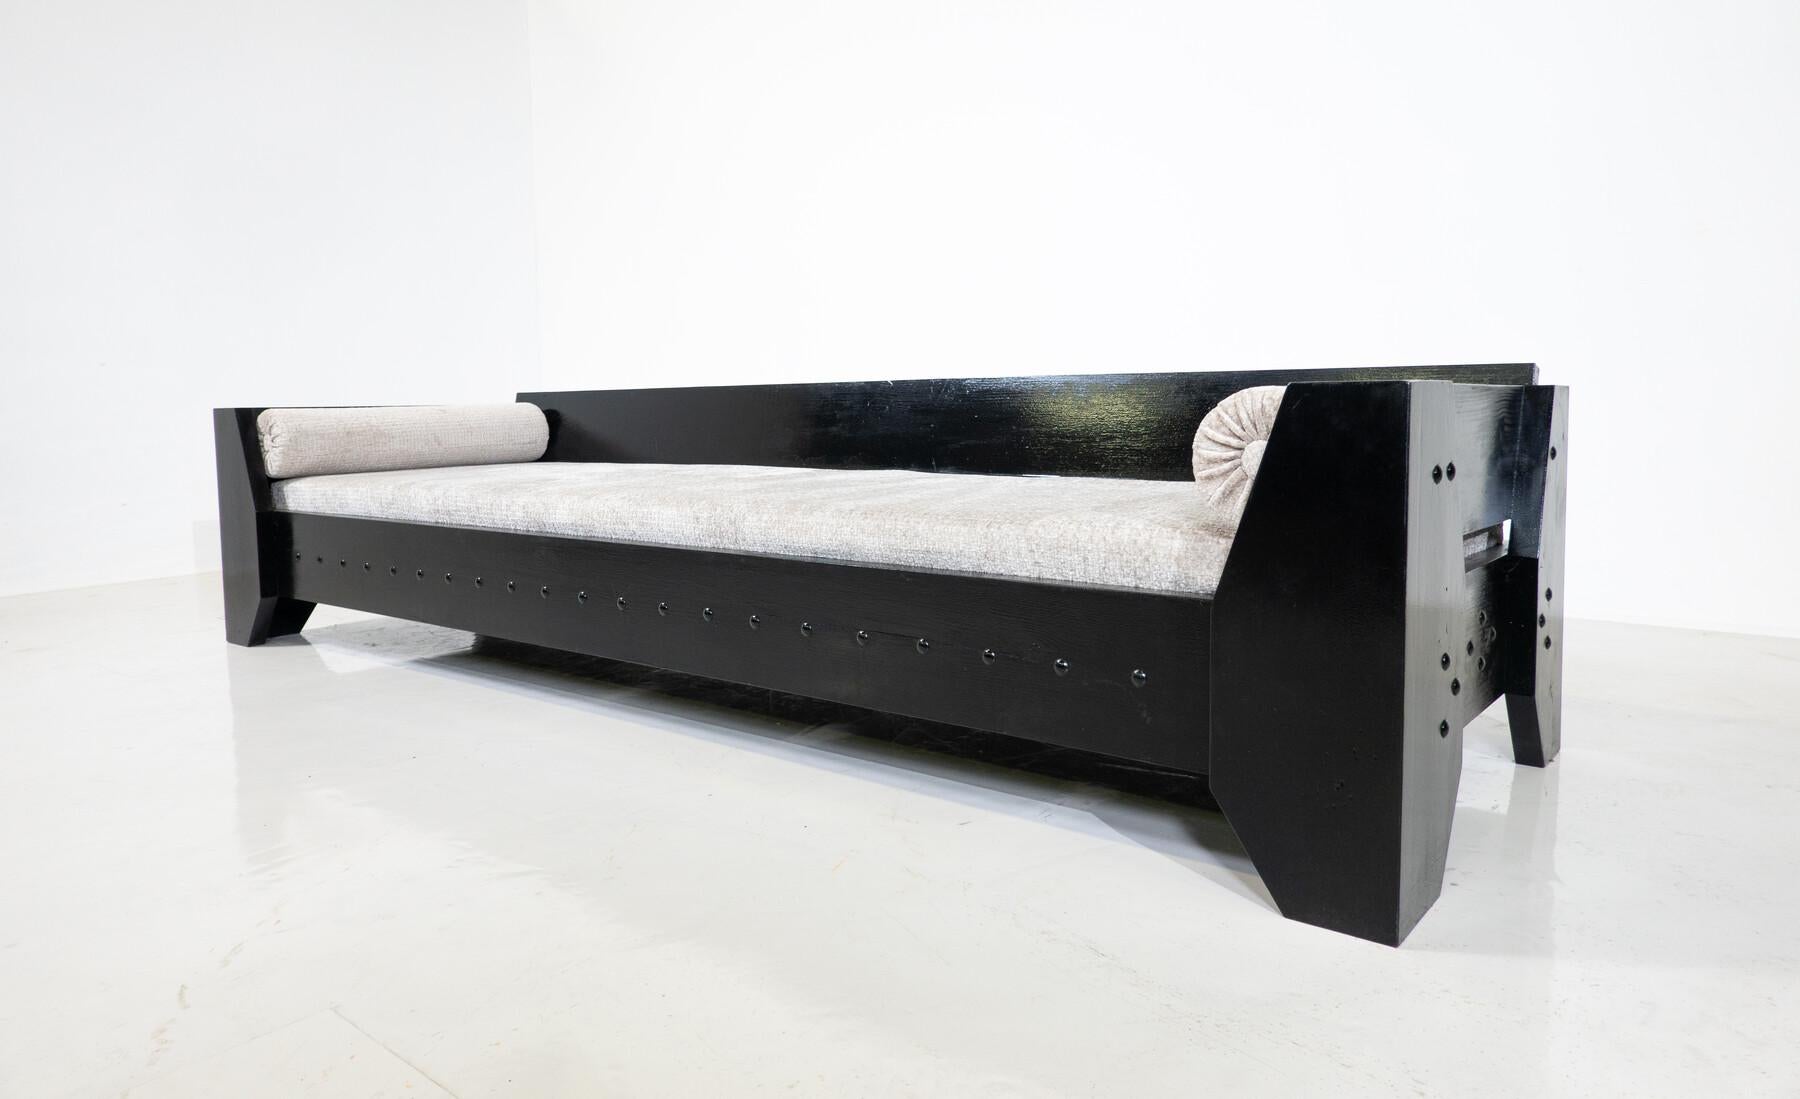 Modernist Sofa / Daybed, Black Wood and Fabric, 1960s For Sale 4